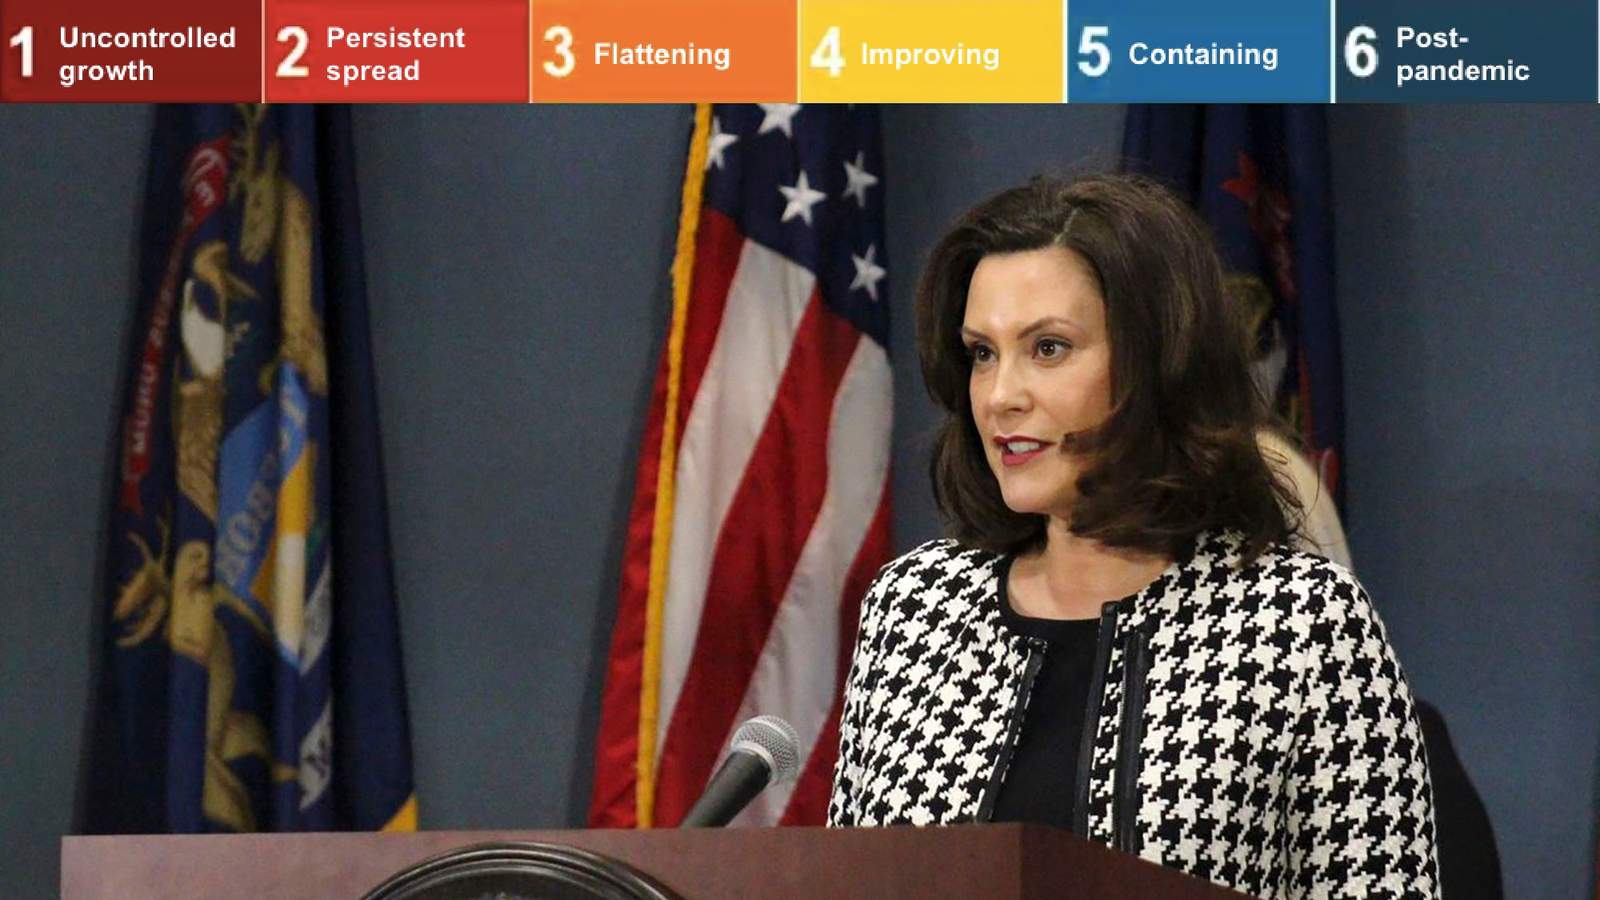 Here are the 6 stages in Michigan Gov. Gretchen Whitmer’s plan to fully reopen the state